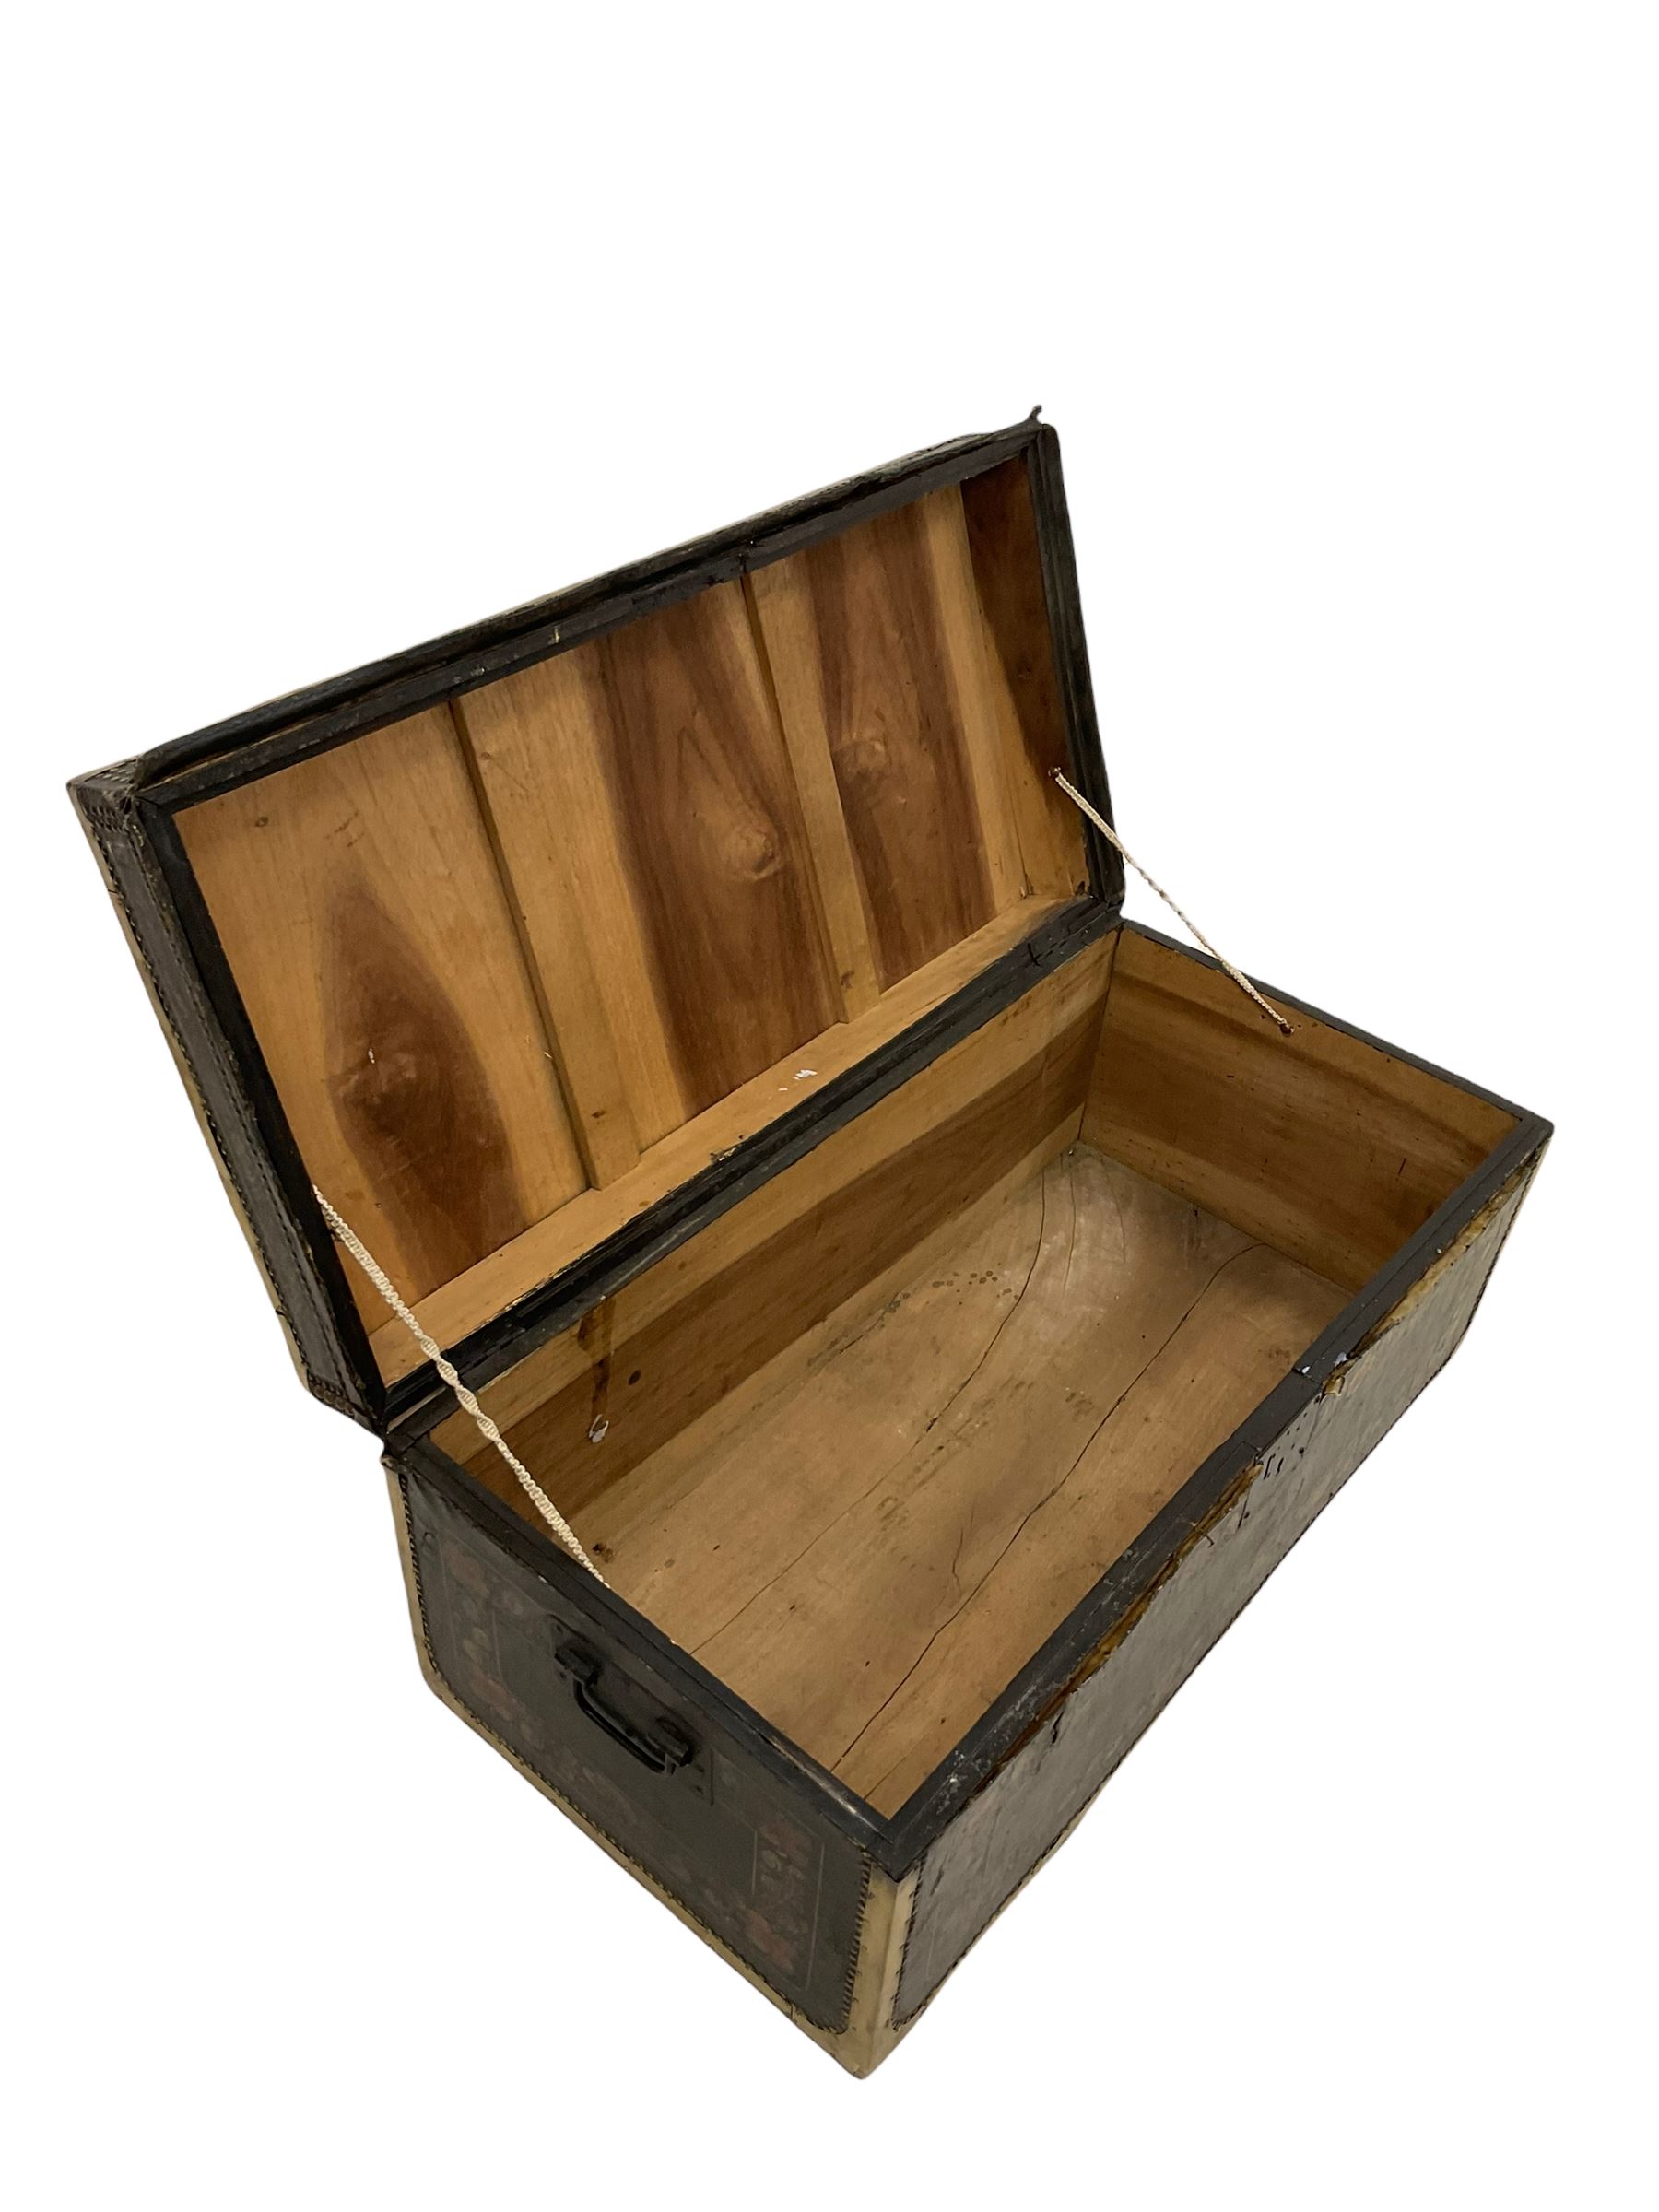 19th century Chinese export camphor wood chest - Image 4 of 7